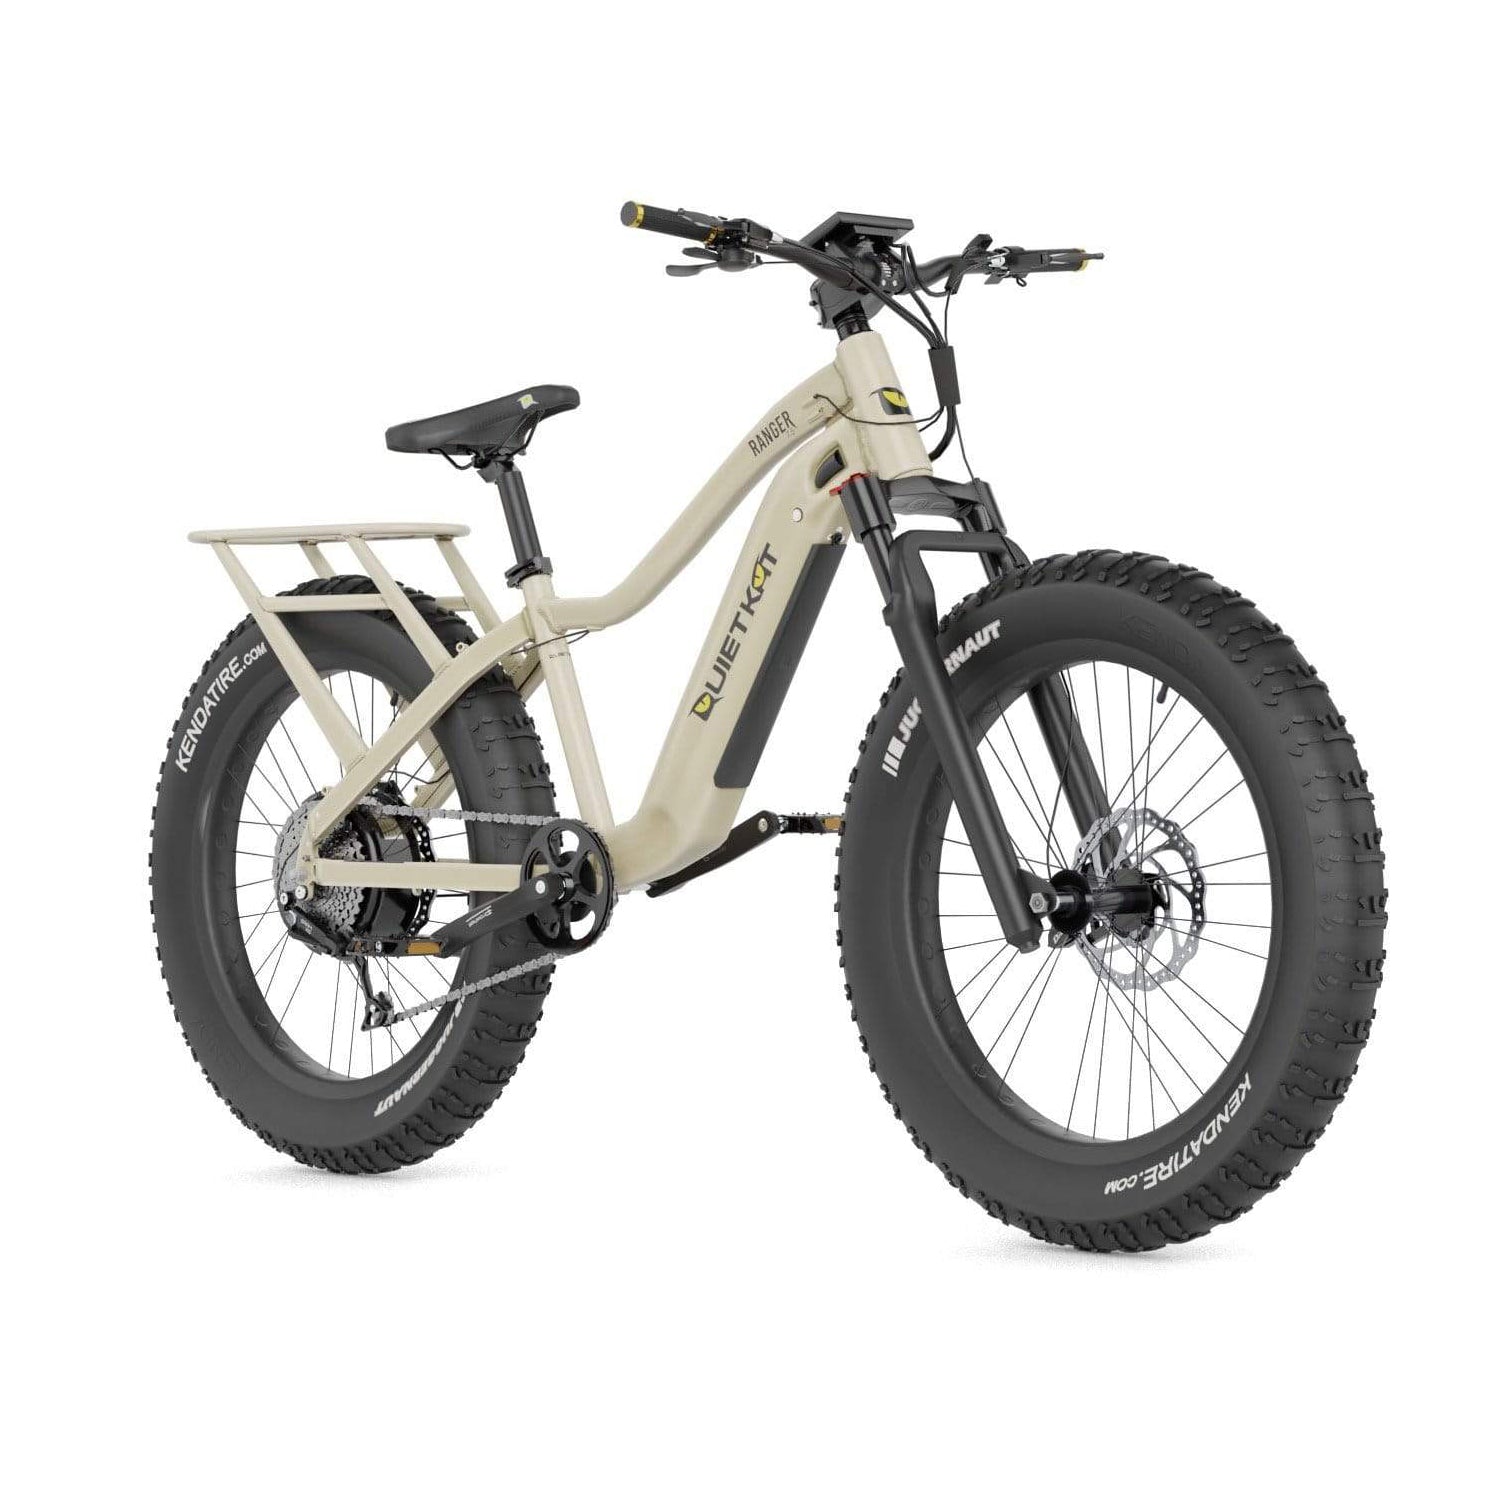 Hunting E-Bikes - Recreation Outfitters